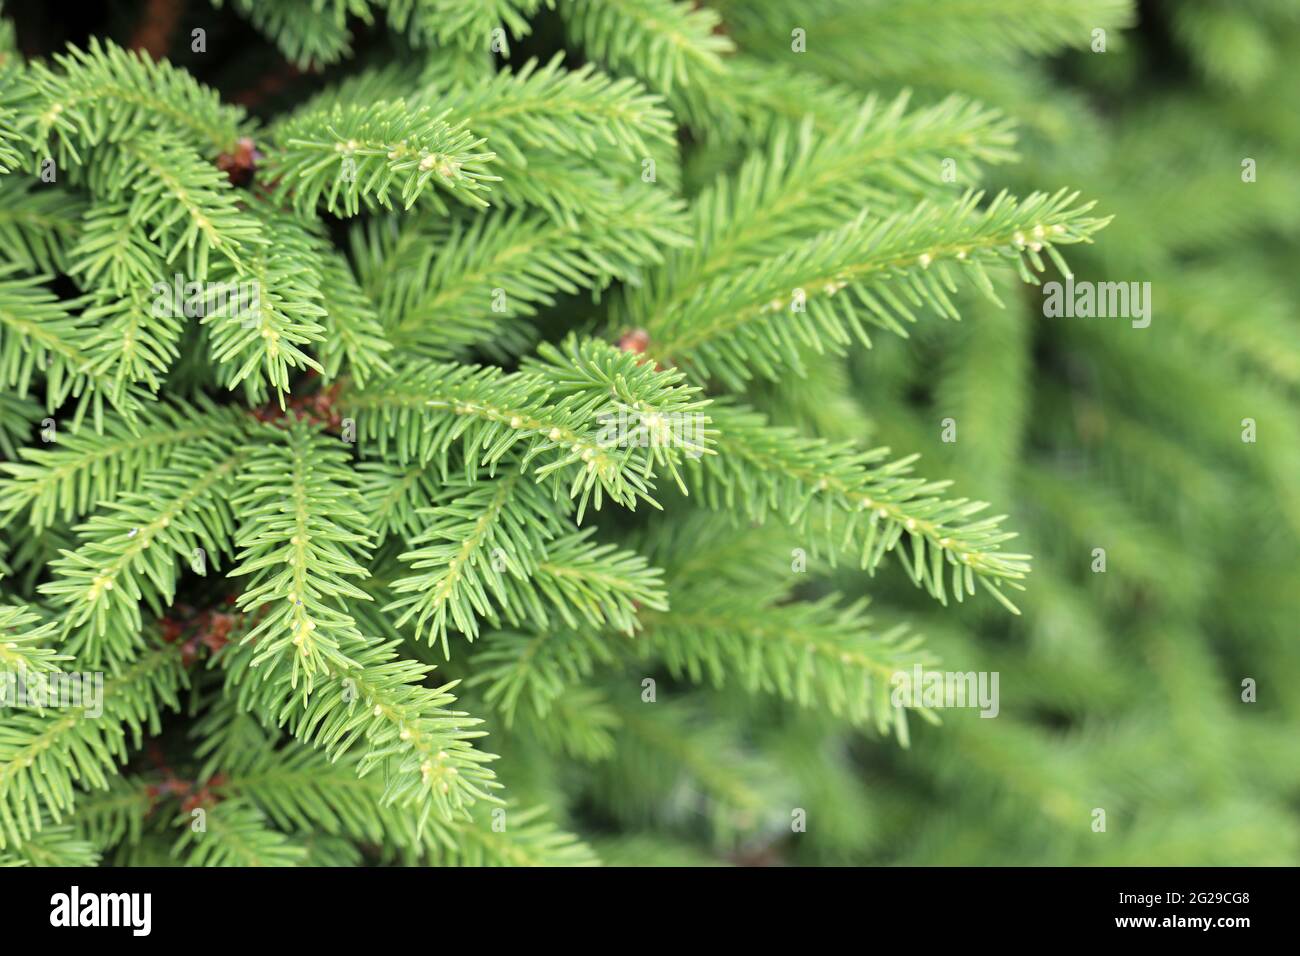 Fir branches with young green needles, spruce Christmas background Stock Photo